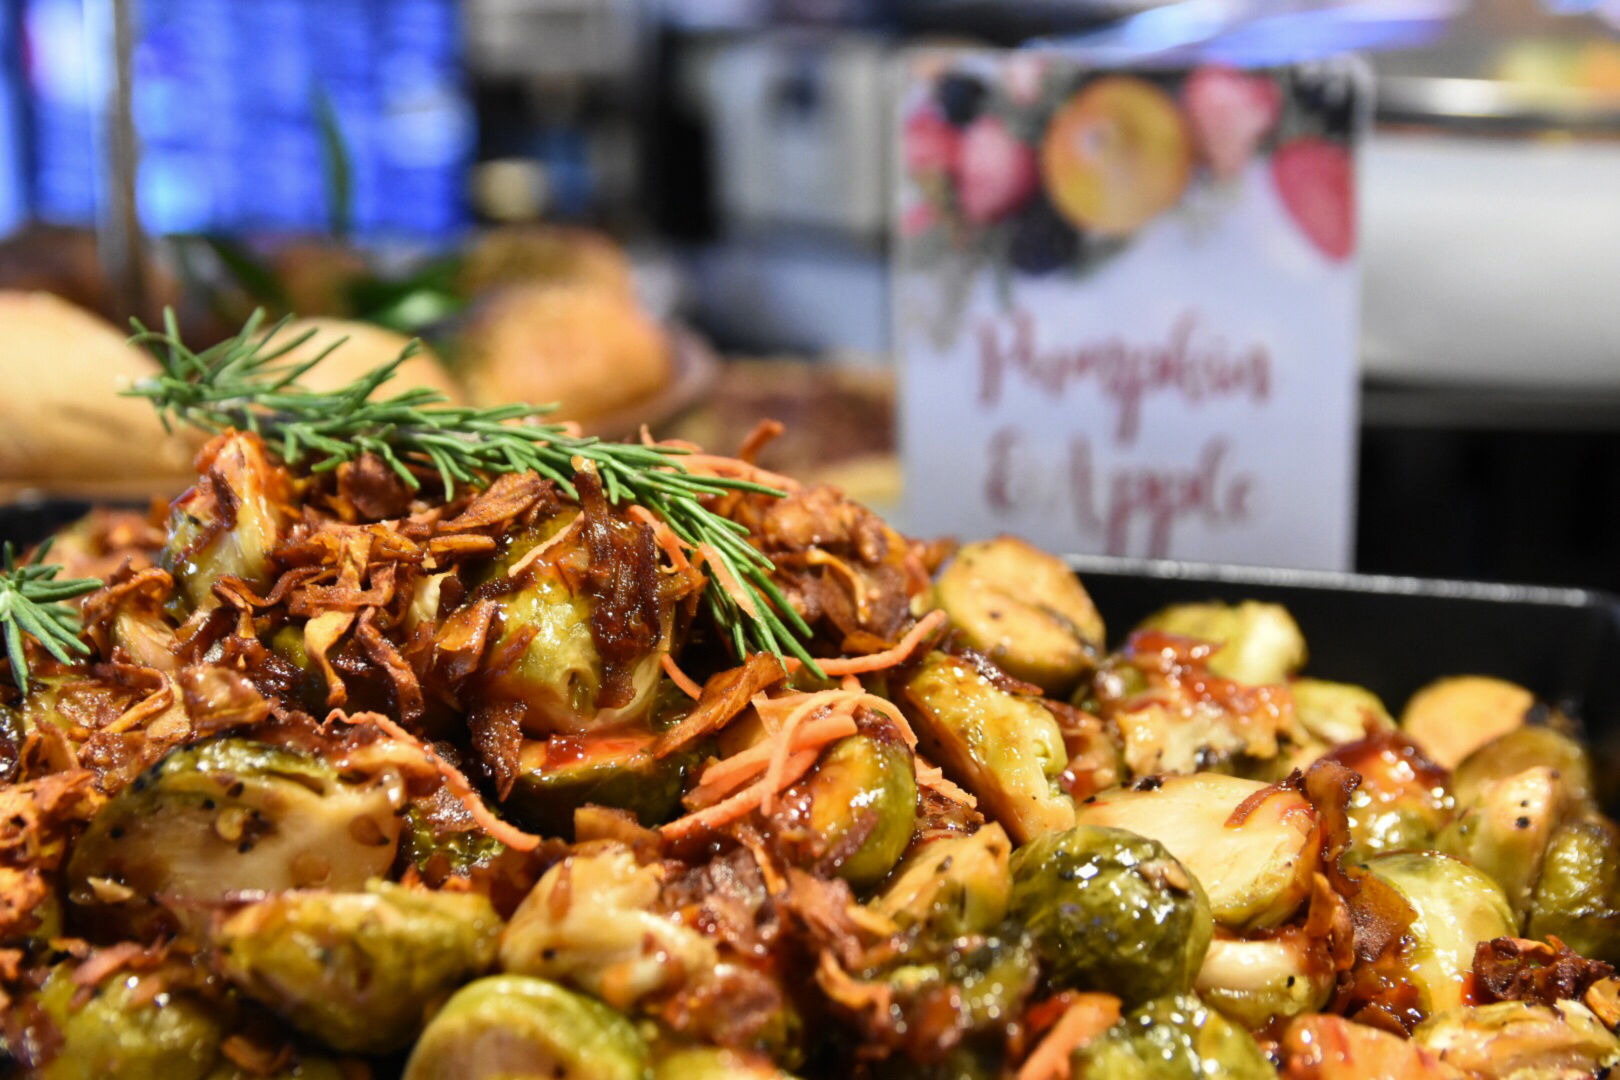 Brussels sprouts from Amphora. (WTOP/Alejandro Alvarez)